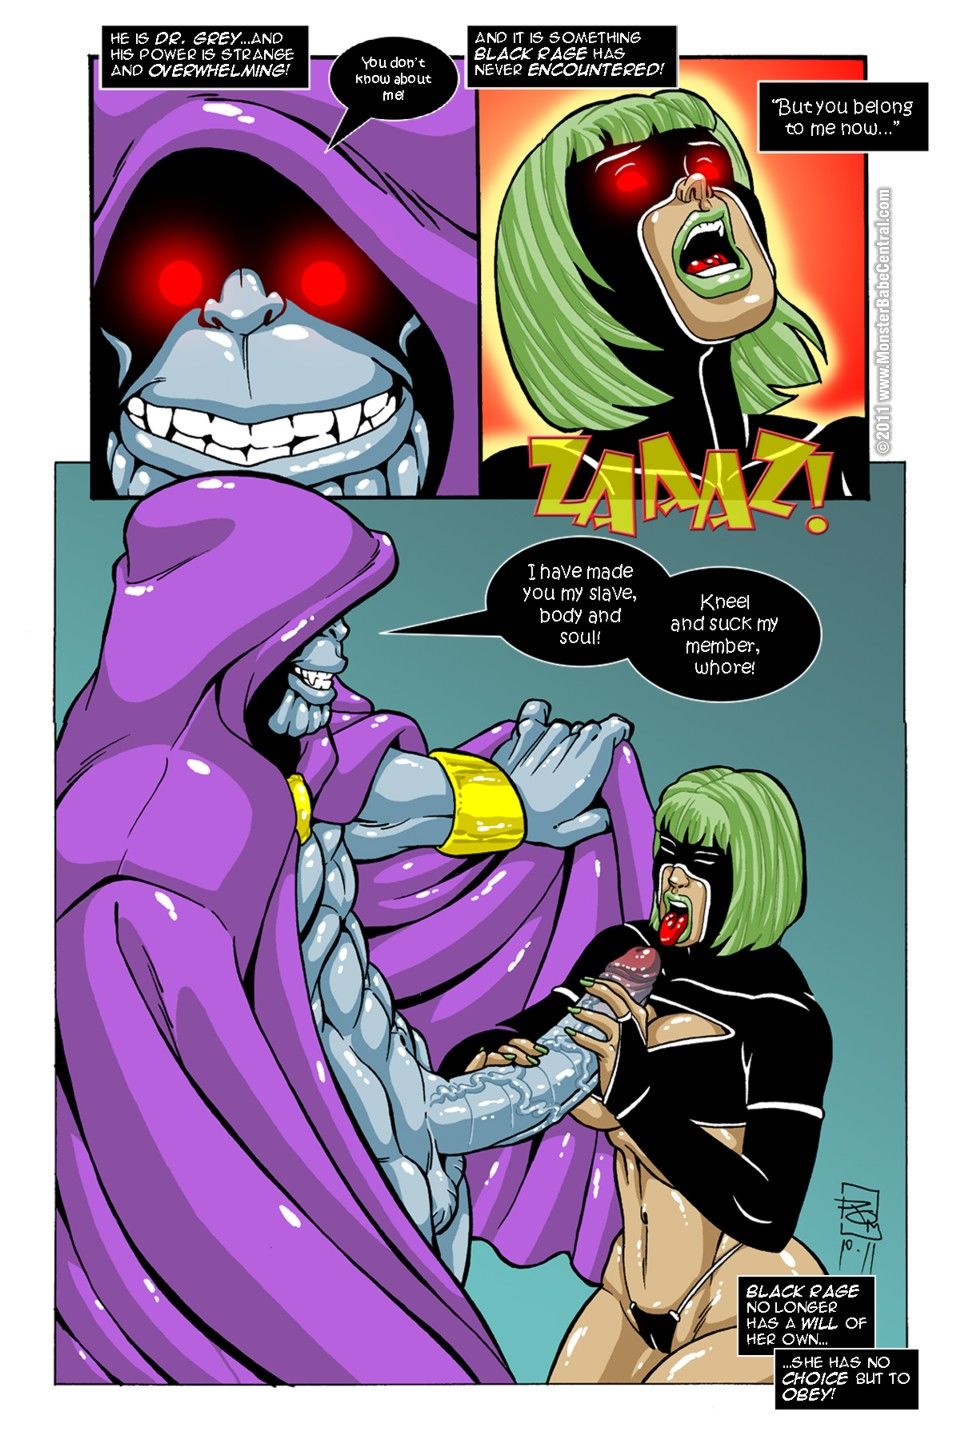 Omega Fighters 13-14,XXX Monster sex page 7